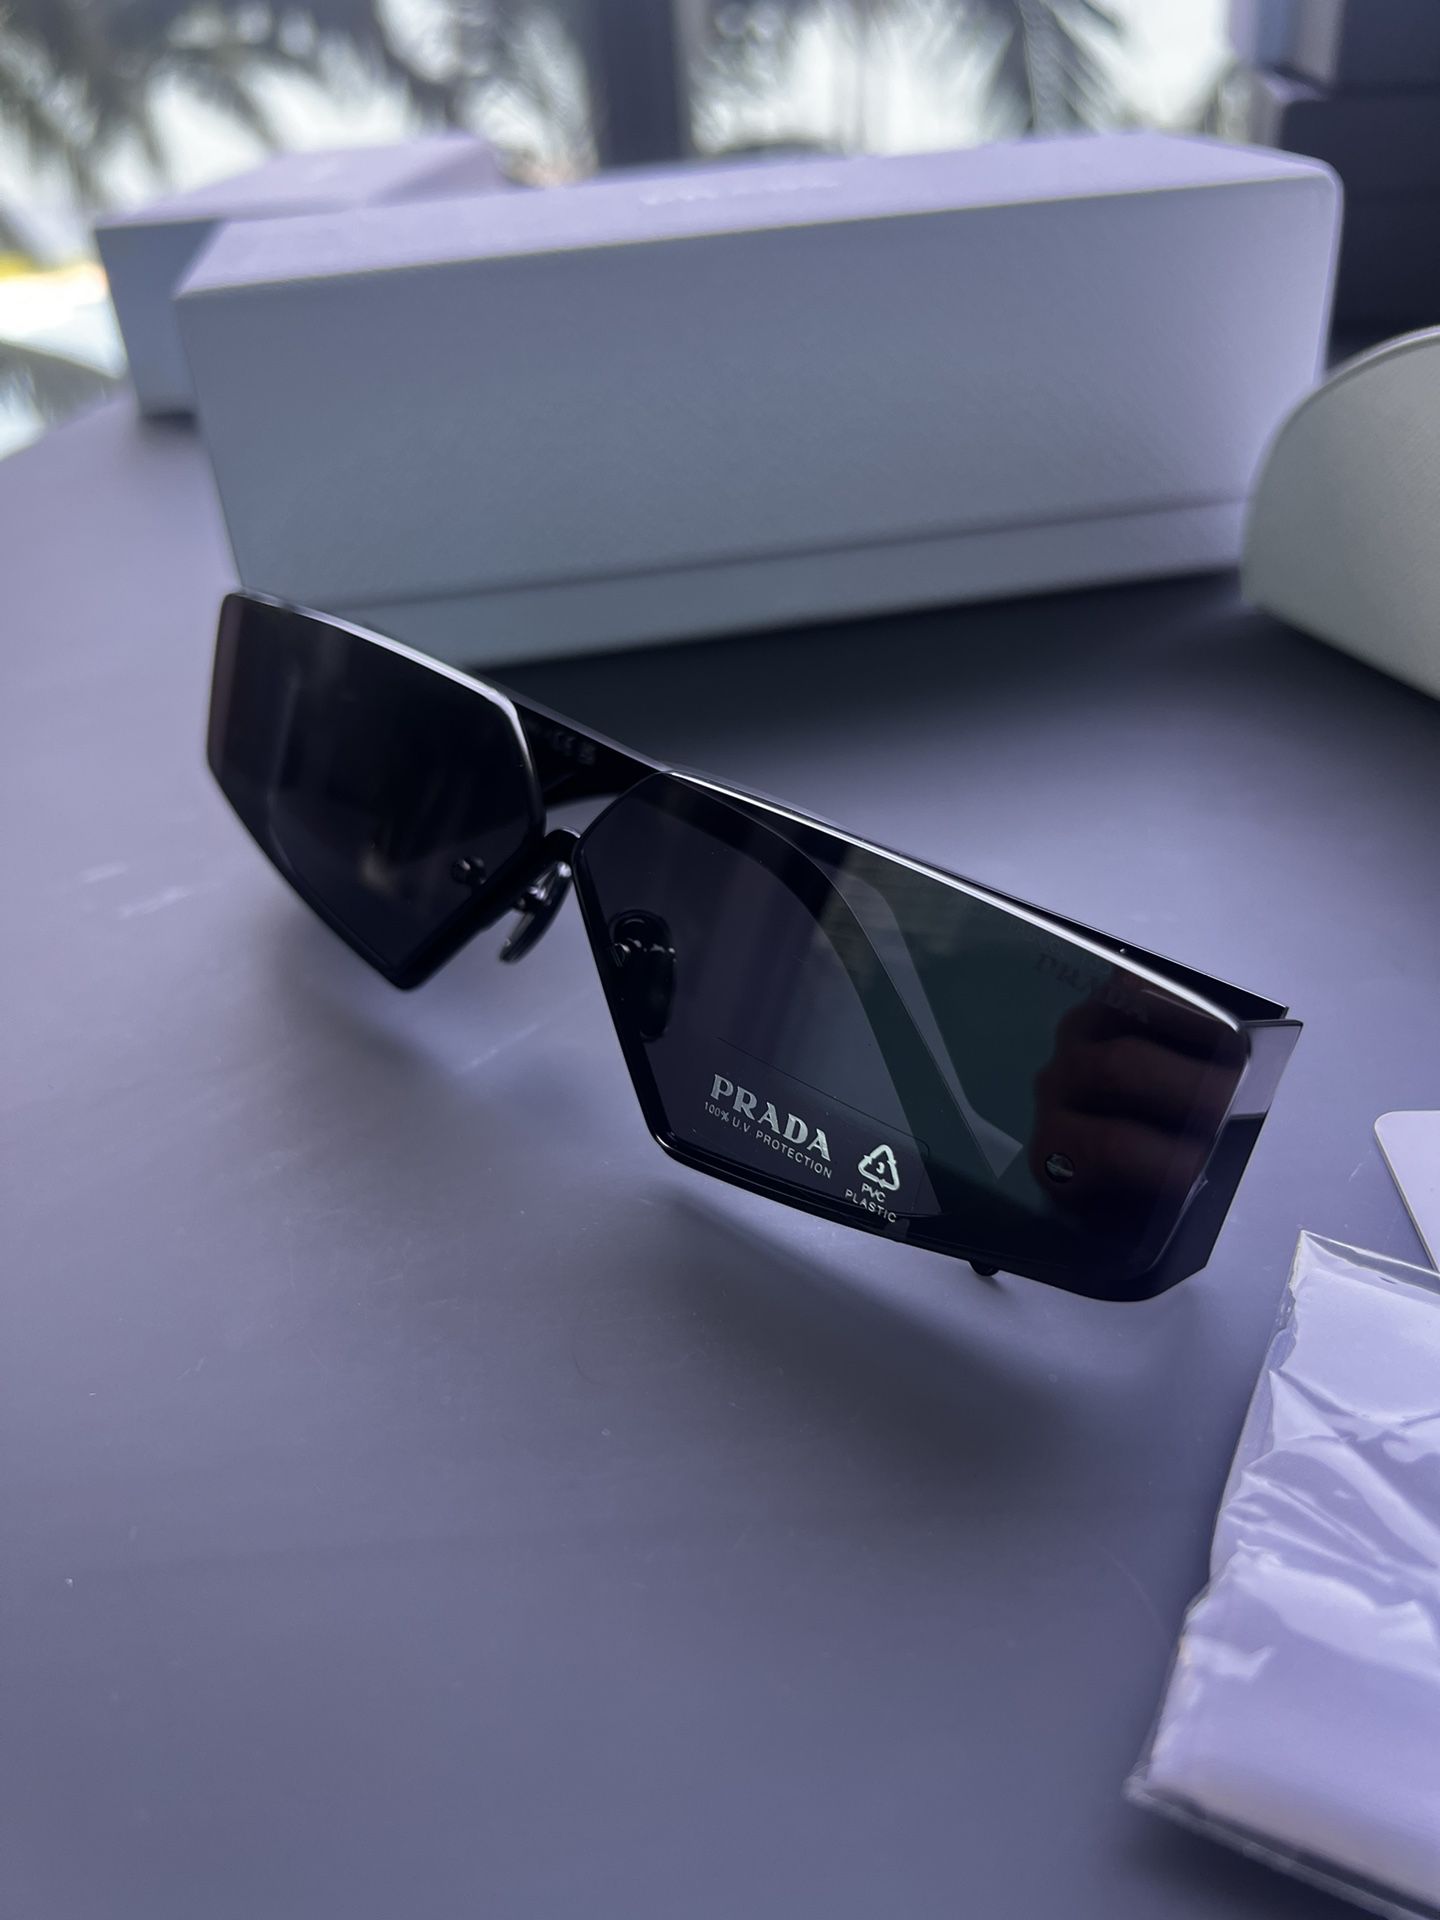 Hot Selling CHANEL Sunglasses for Sale in Miami, FL - OfferUp